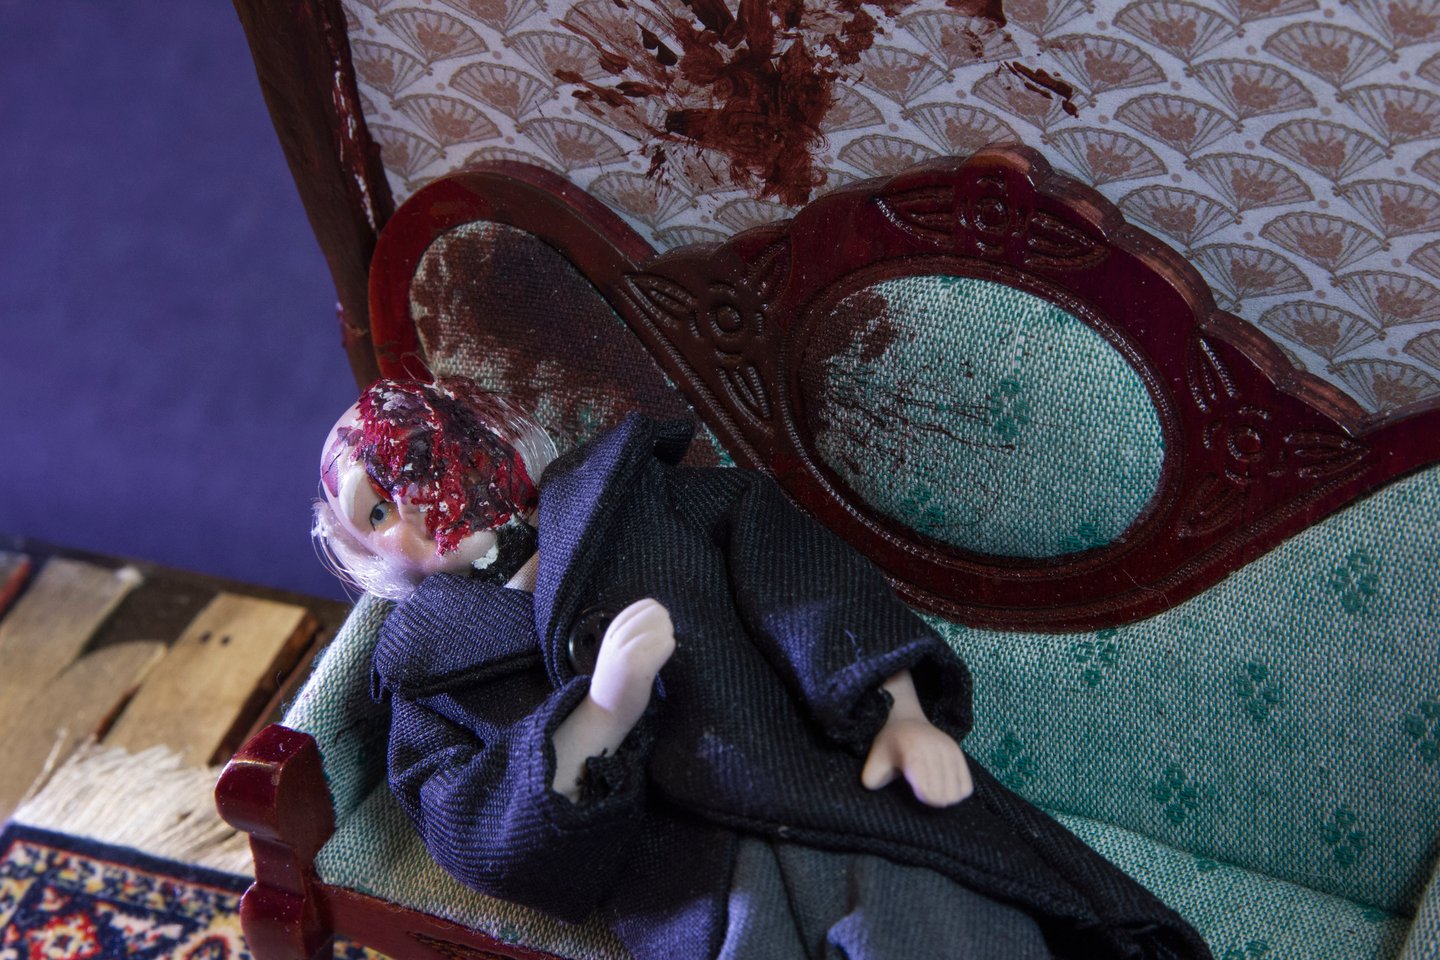 This photograph is a close up of the doll reclining on the couch. We see the gouge marks and blood spatters on his face and on the wall and the couch behind him.